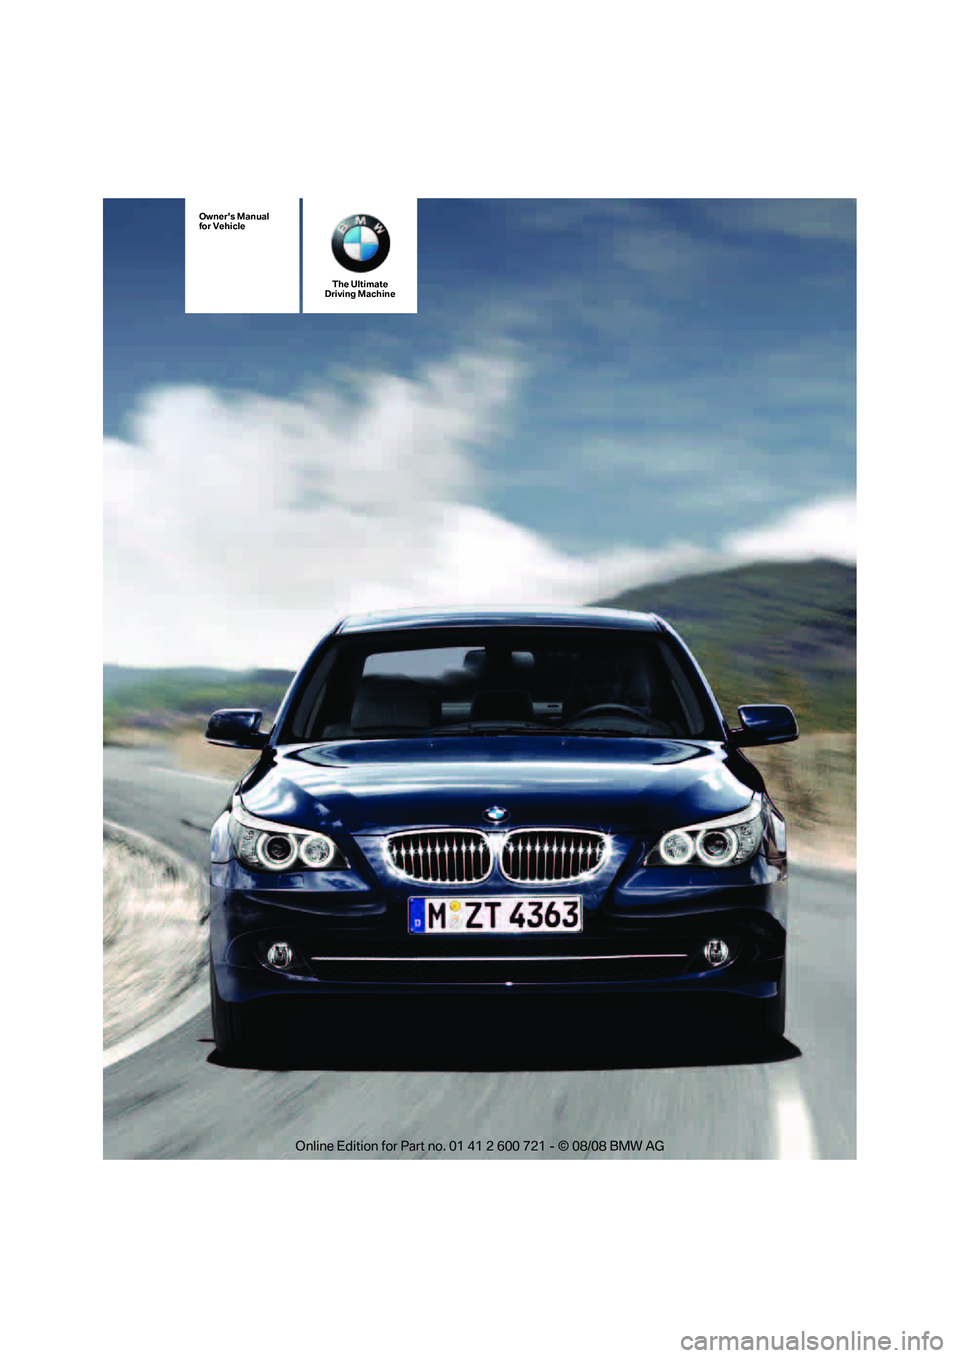 BMW 535I XDRIVE 2009  Owners Manual The Ultimate
Driving Machine
Owners Manual
for Vehicle 